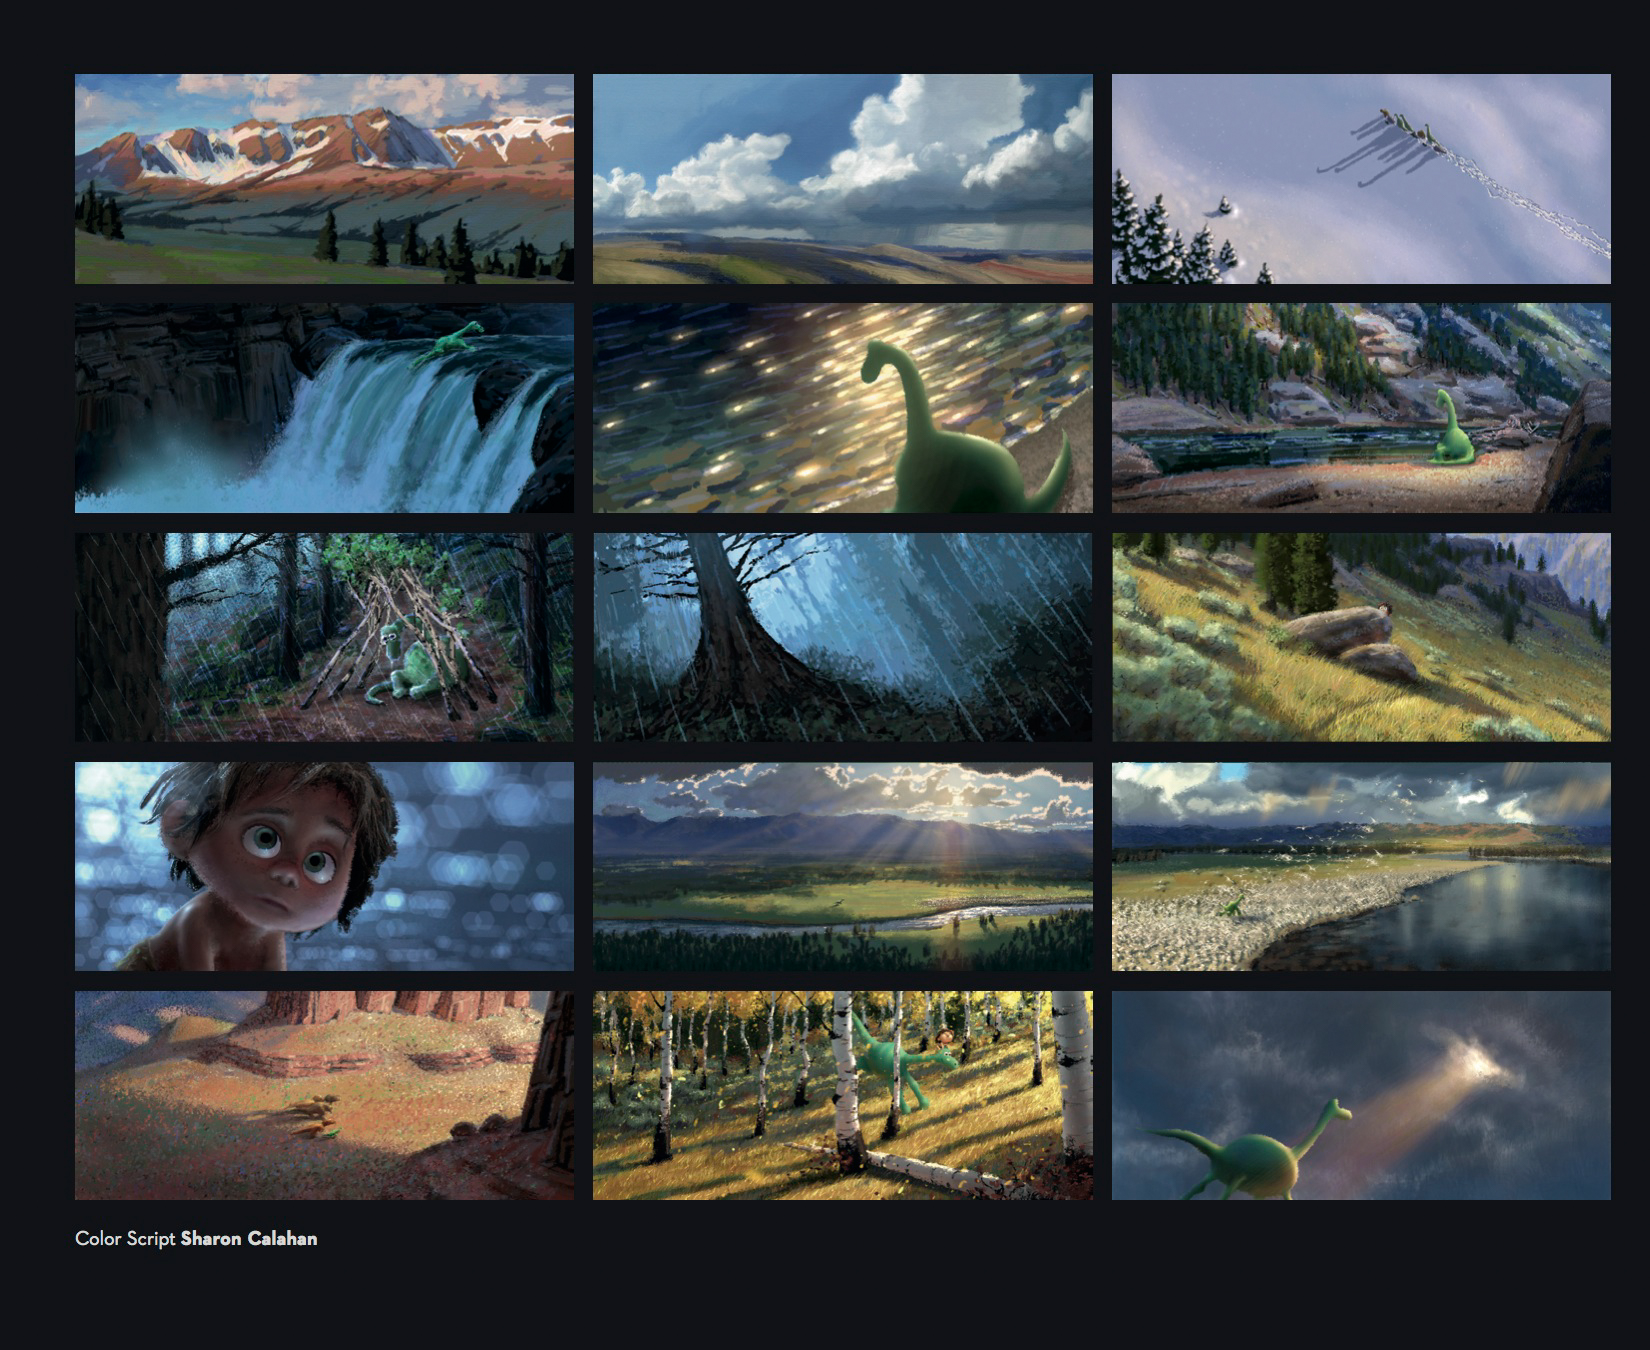 The Making of The Good Dinosaur1650 x 1350